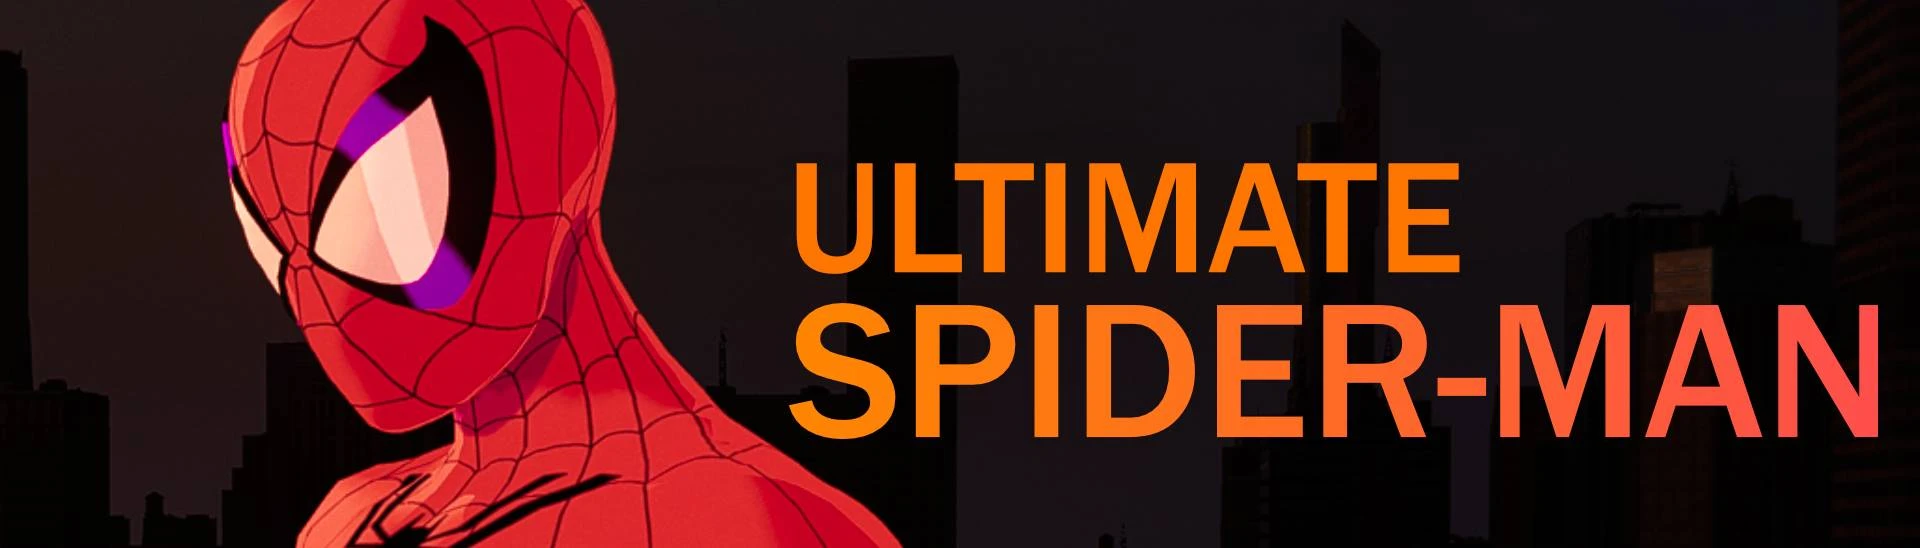 Nah this is a top 10 mod! 😤 #ultimatespiderman #spidermanremastered #